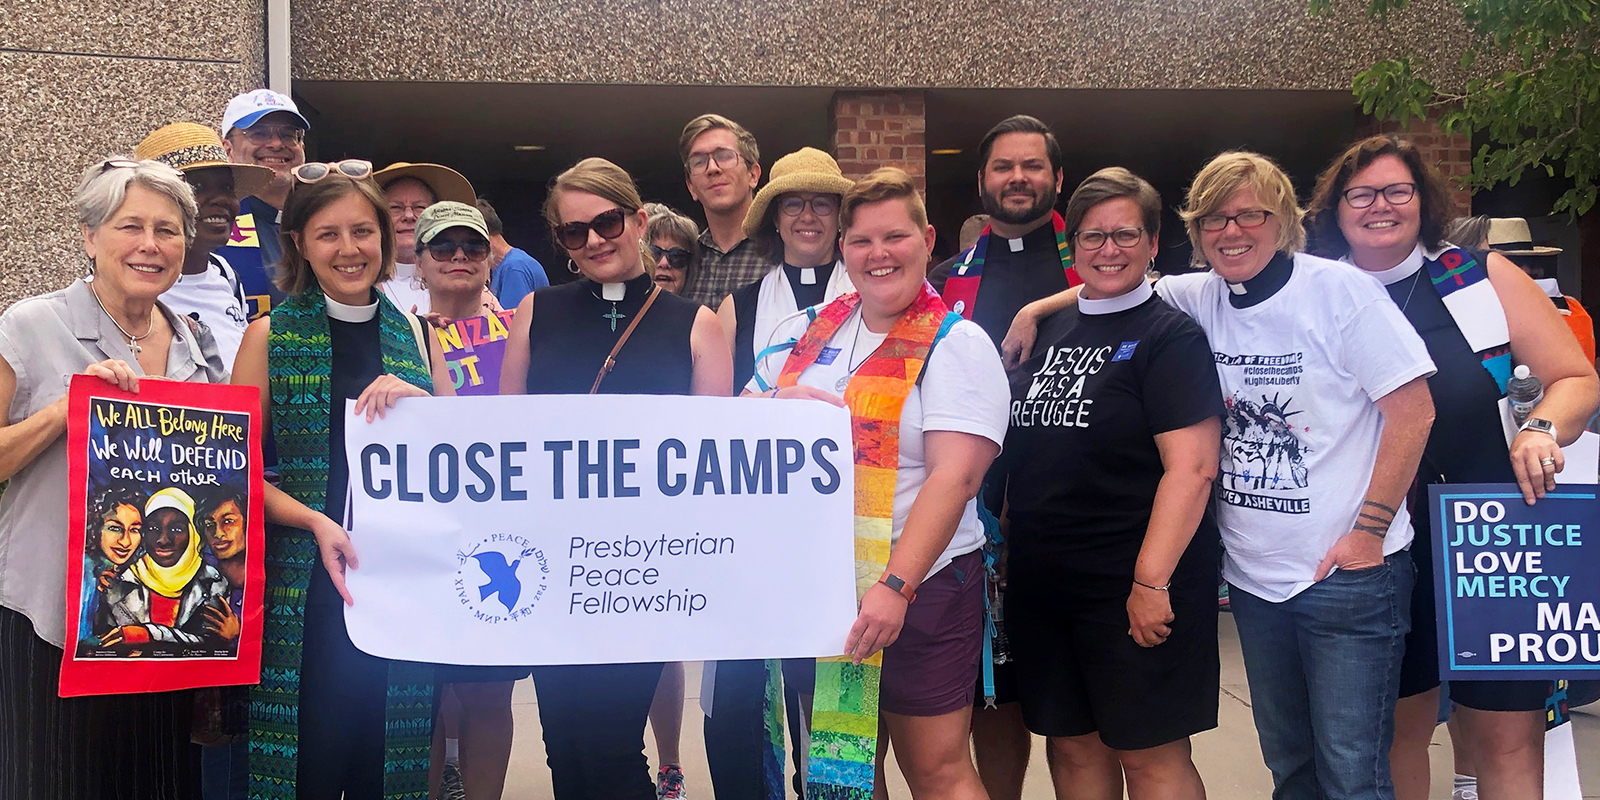 A delegation from Southside Presbyterian Church in Tucson, Arizona, took part in the Moral Monday demonstration outside of the U.S. Immigration and Custom Enforcement processing center in El Paso, Texas. Photo by the Reverend Alison Harrington.